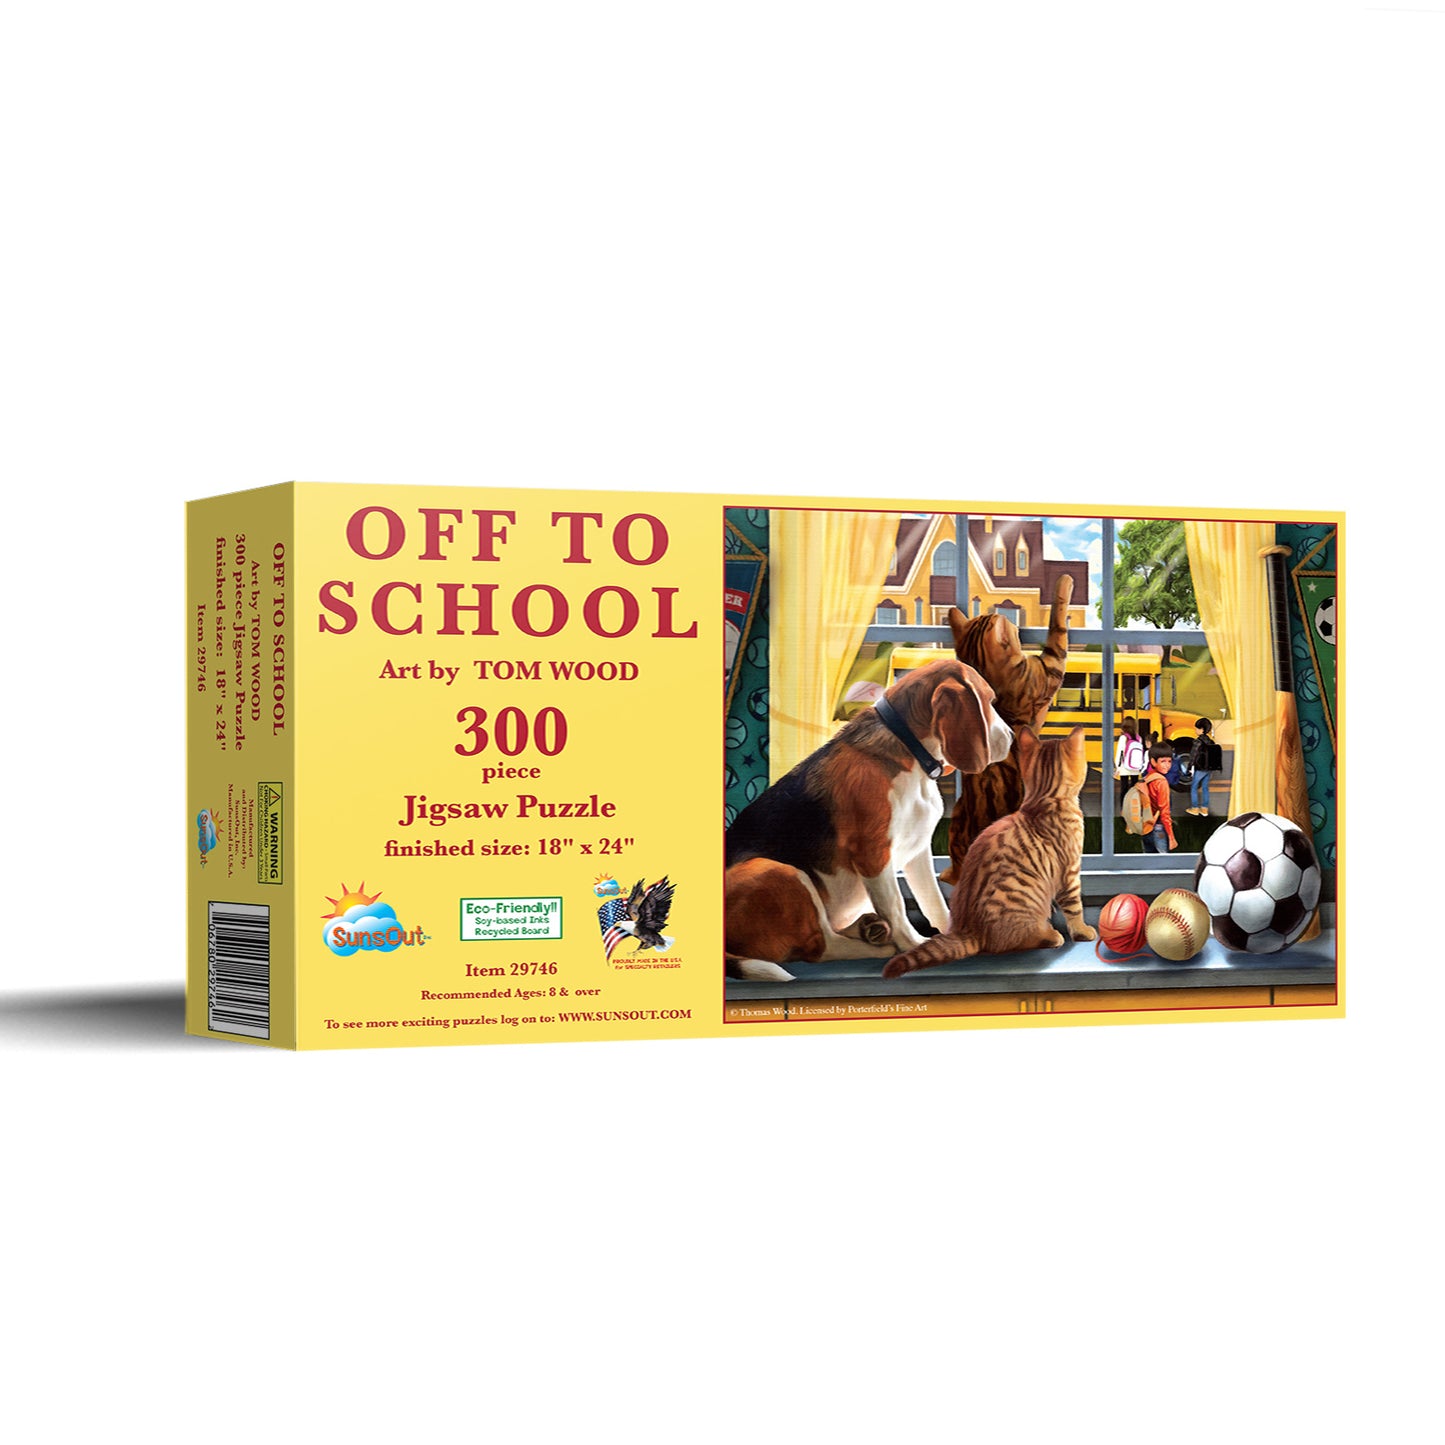 Off to school - 300 Piece Jigsaw Puzzle